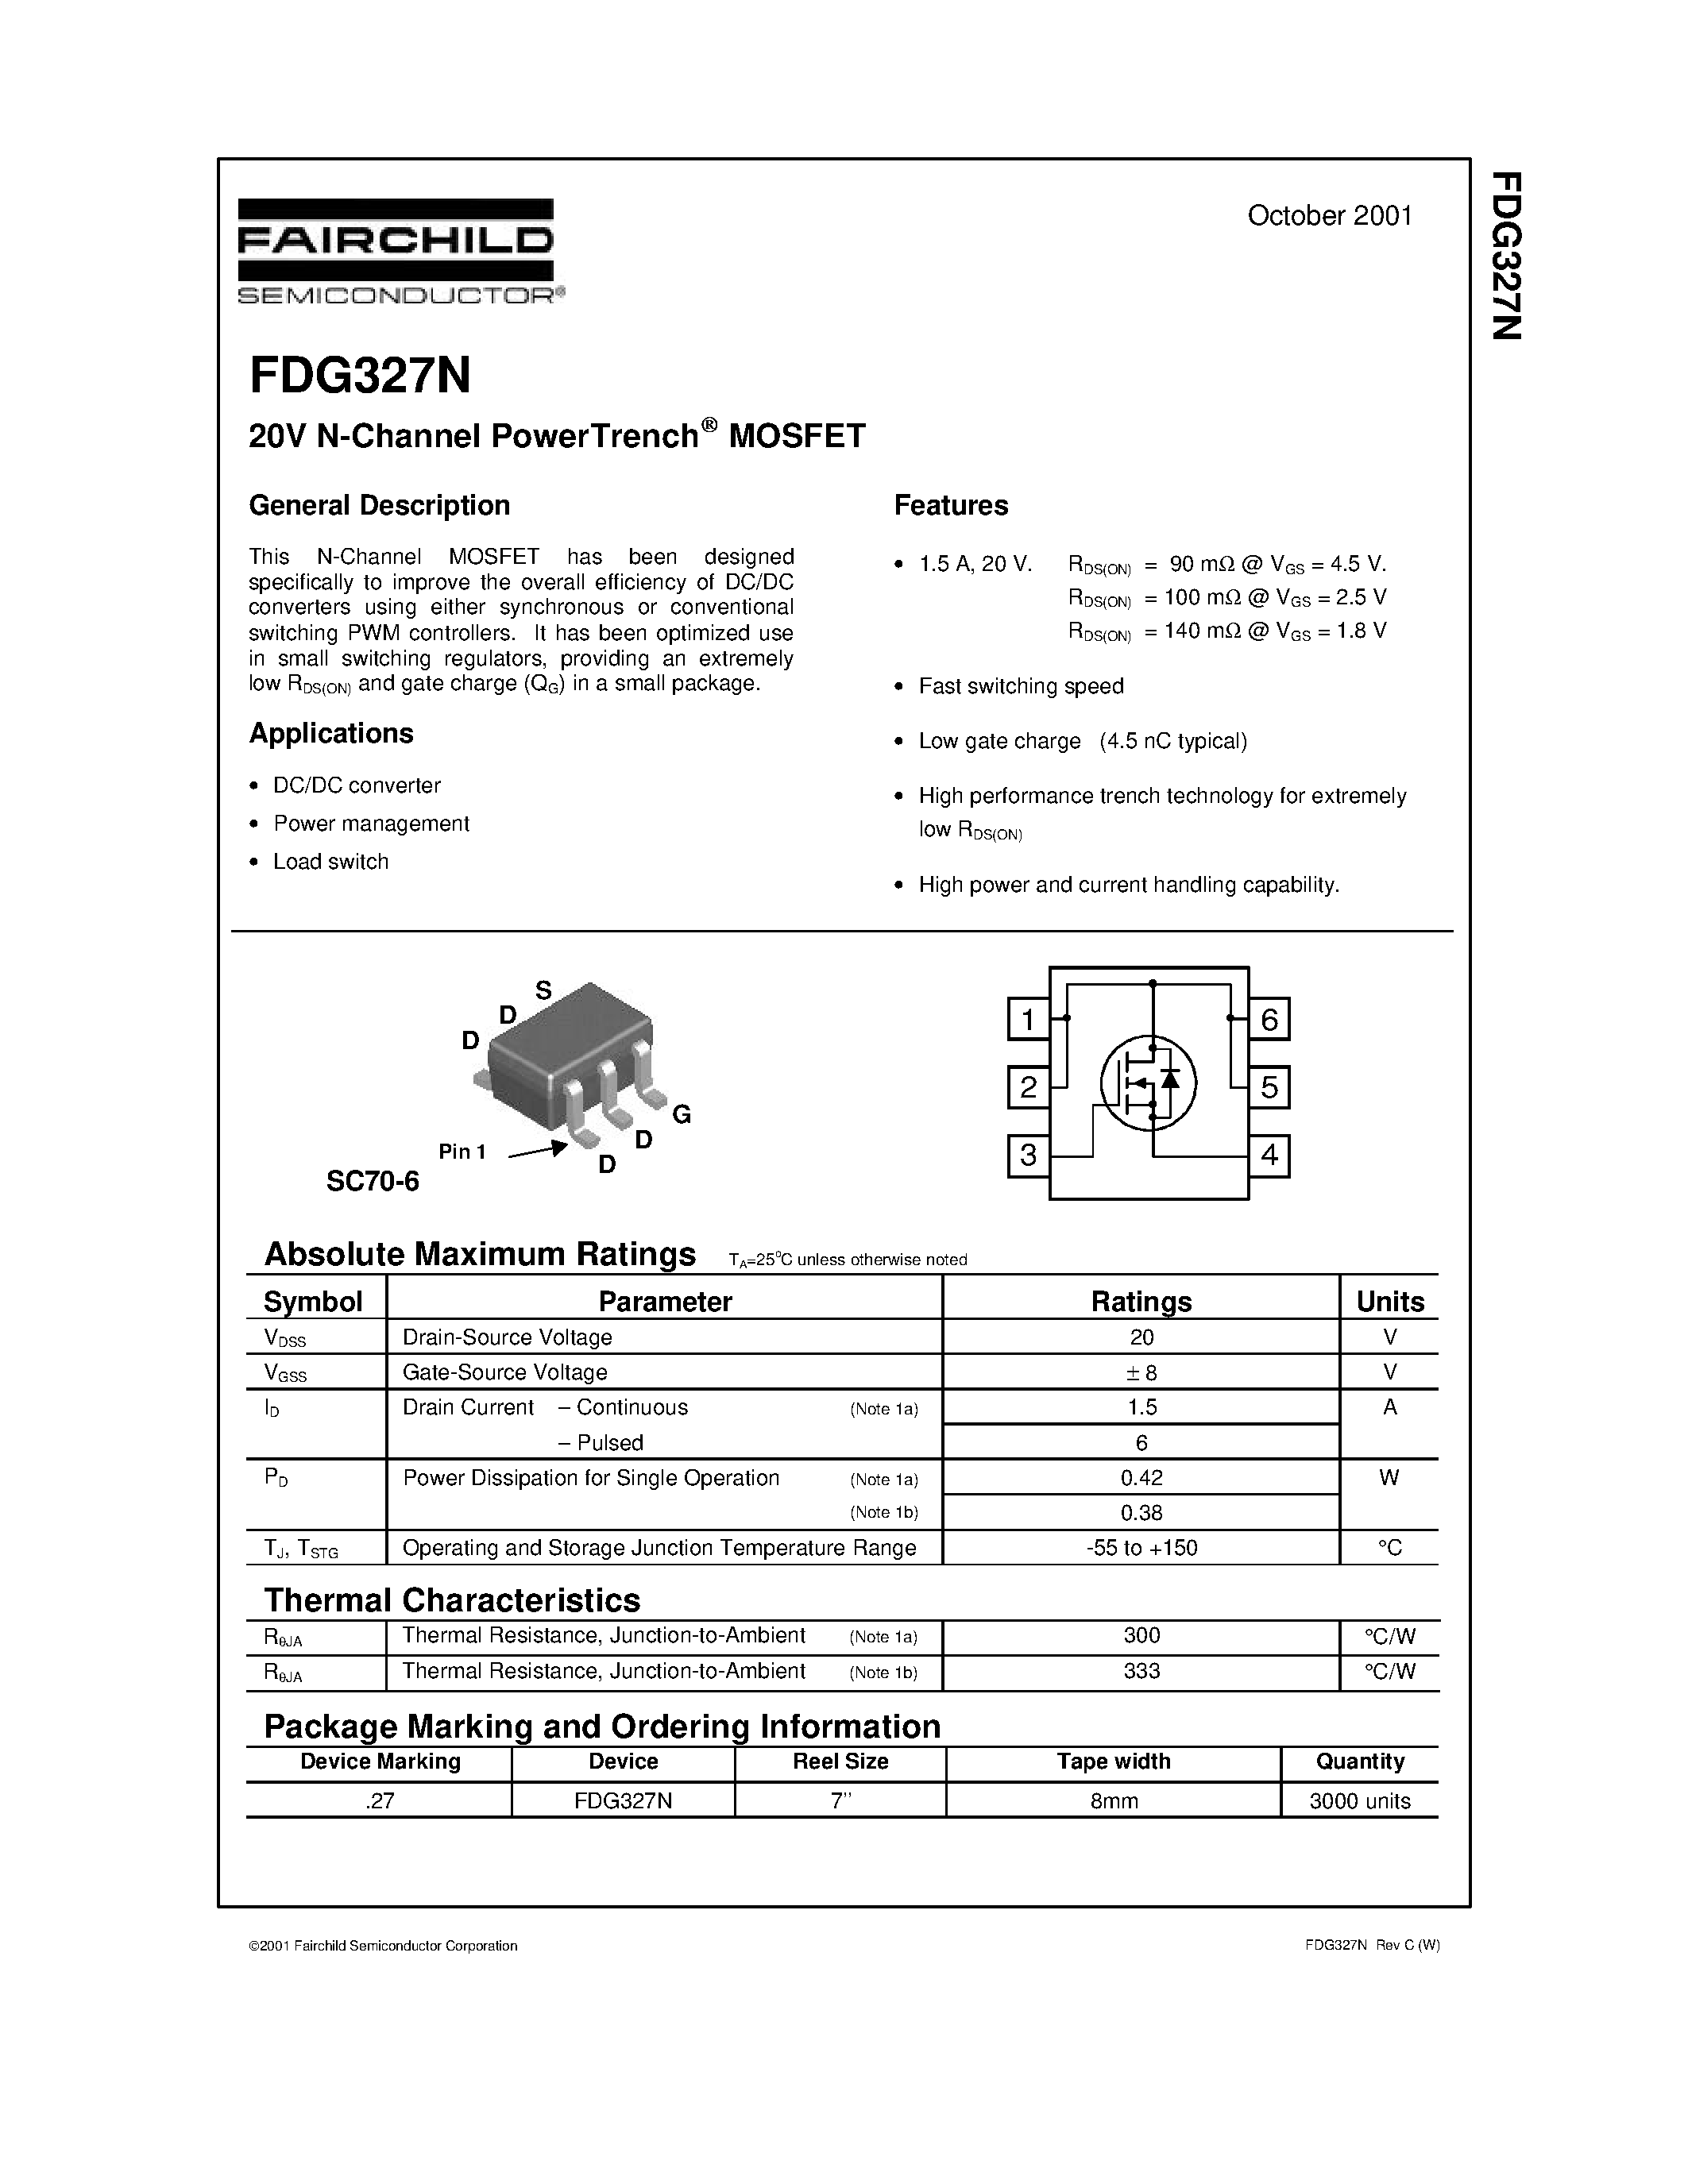 Даташит FDG327N - 20V N-Channel PowerTrench MOSFET страница 1